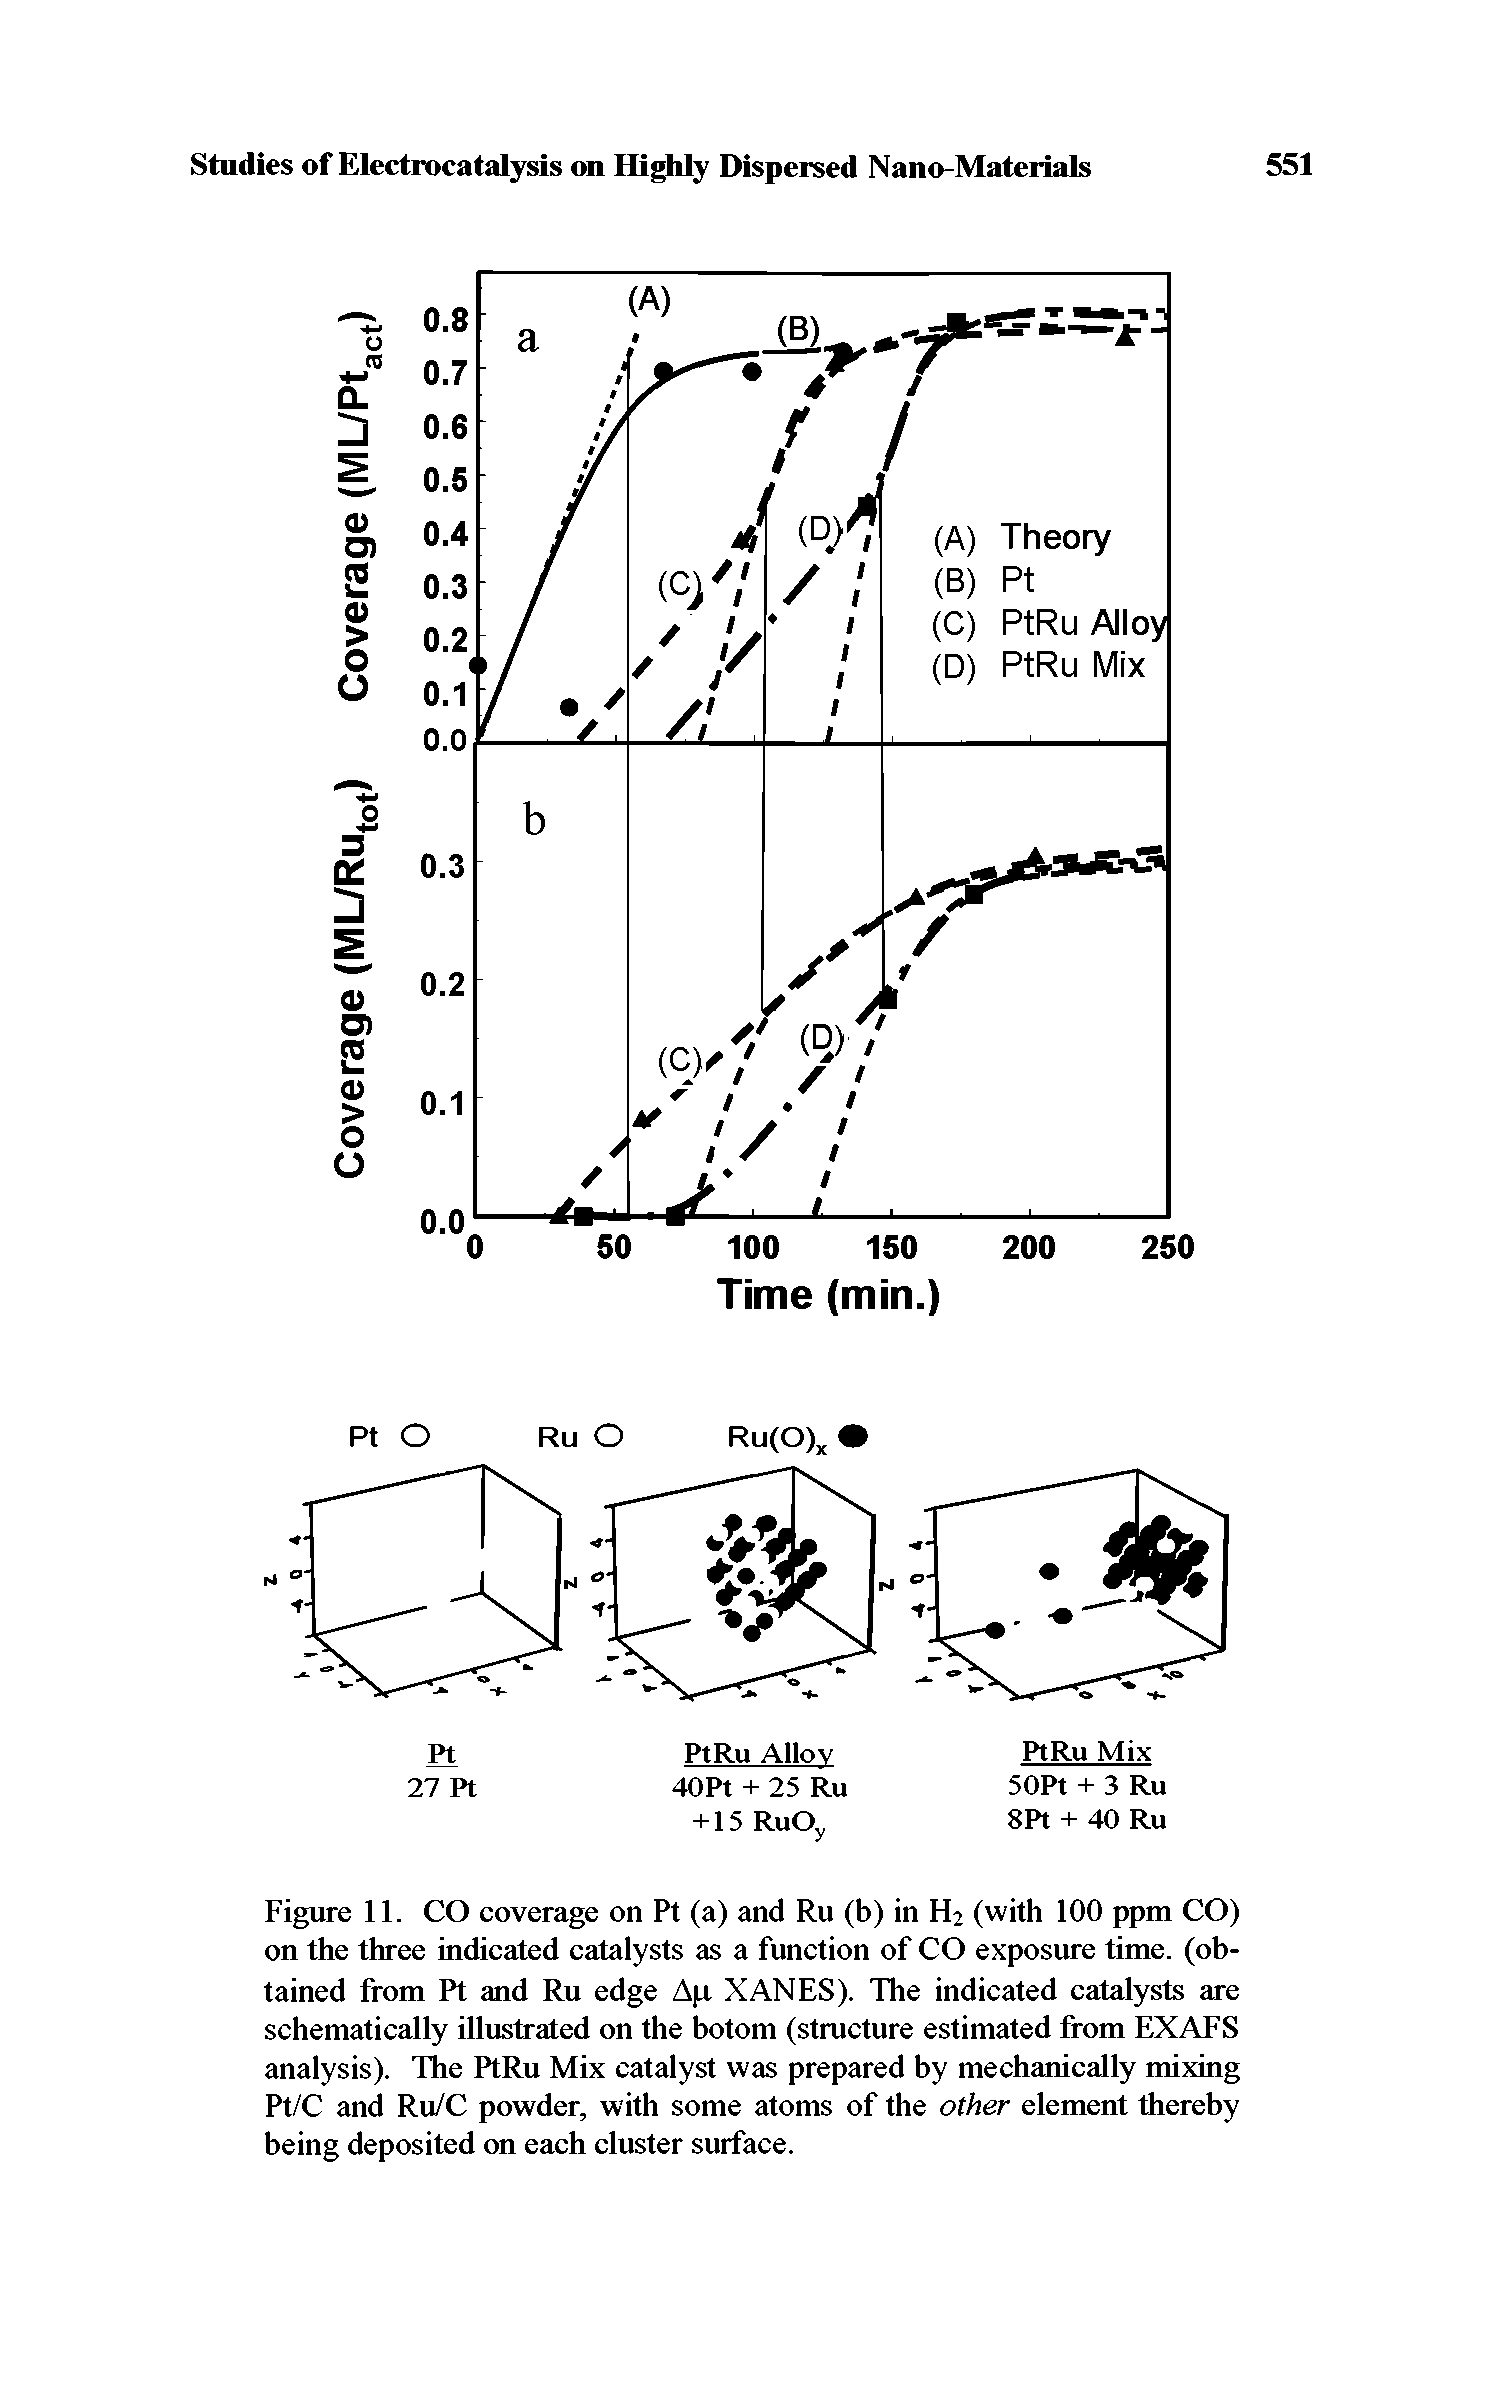 Figure 11. CO coverage on Pt (a) and Ru (b) in H2 (with 100 ppm CO) on the three indicated catalysts as a function of CO exposure time, (obtained from Pt and Ru edge Ap XANES). The indicated catalysts are schematically illustrated on the botom (structure estimated from EXAFS analysis). The PtRu Mix catalyst was prepared by mechanically mixing Pt/C and Ru/C powder, with some atoms of the other element thereby being deposited on each cluster surface.